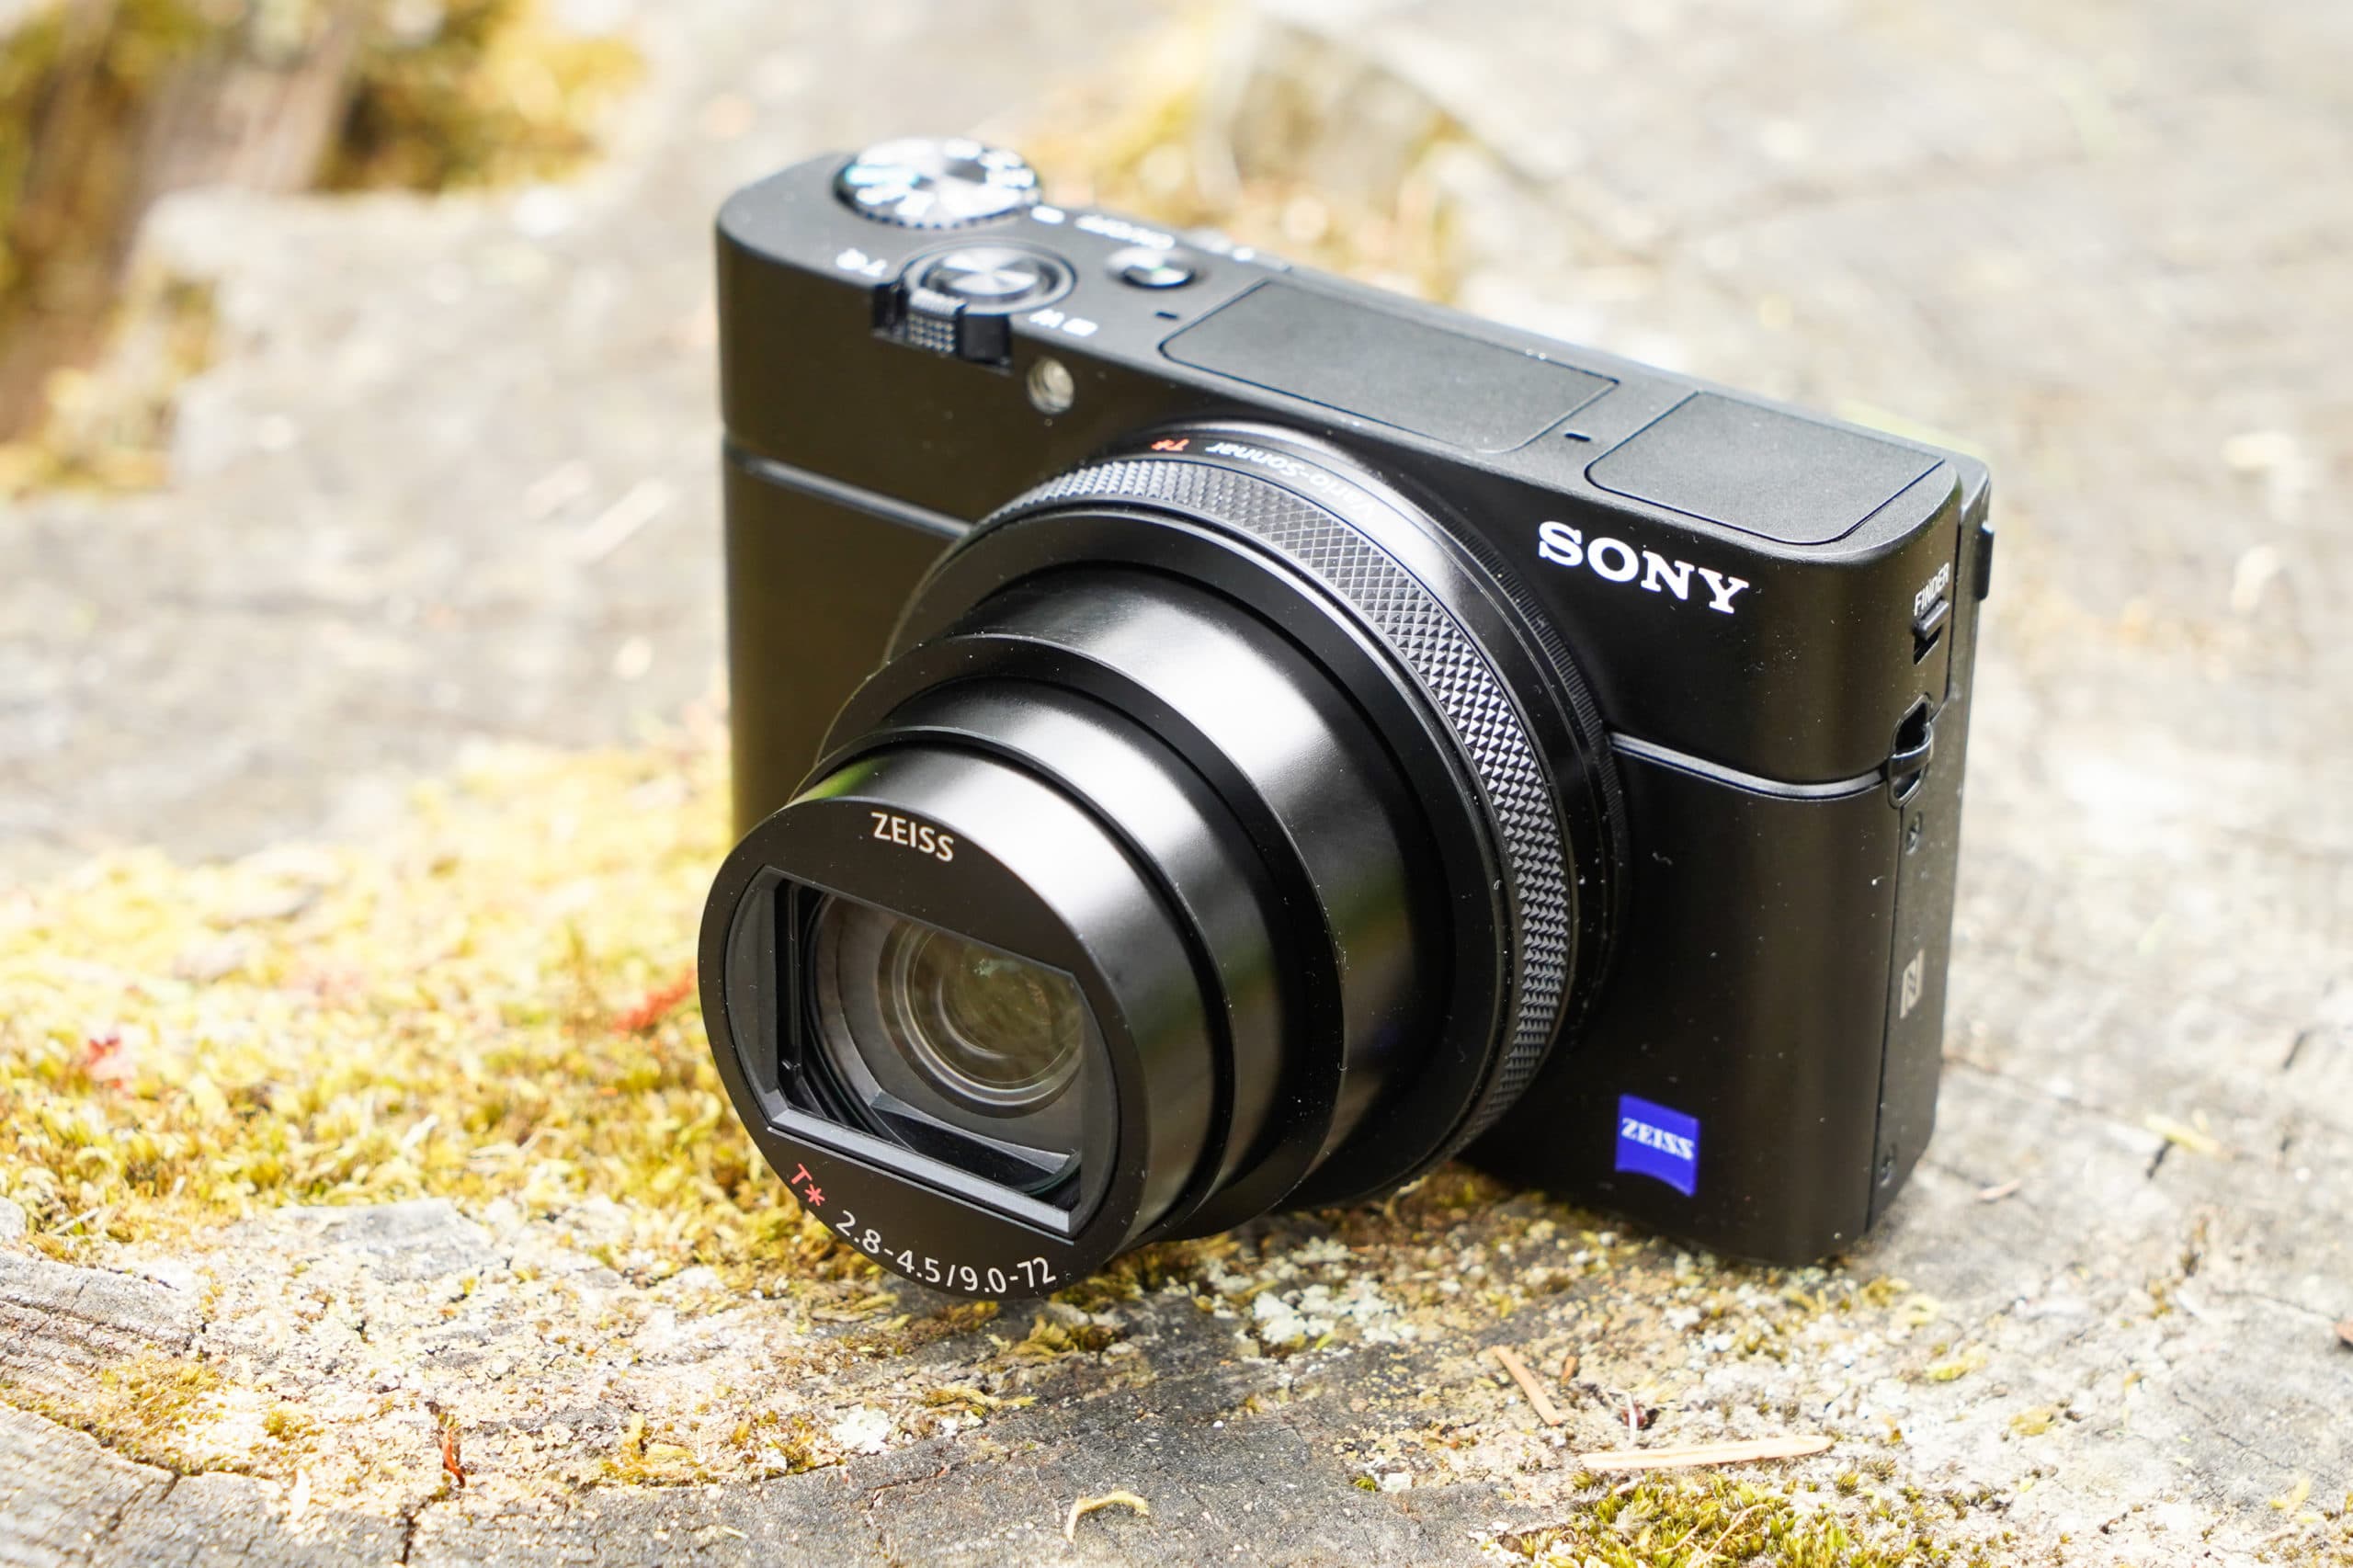 Sony RX100 VII Premium Compact Camera with 1.0-type stacked CMOS sensor  (DSCRX100M7)